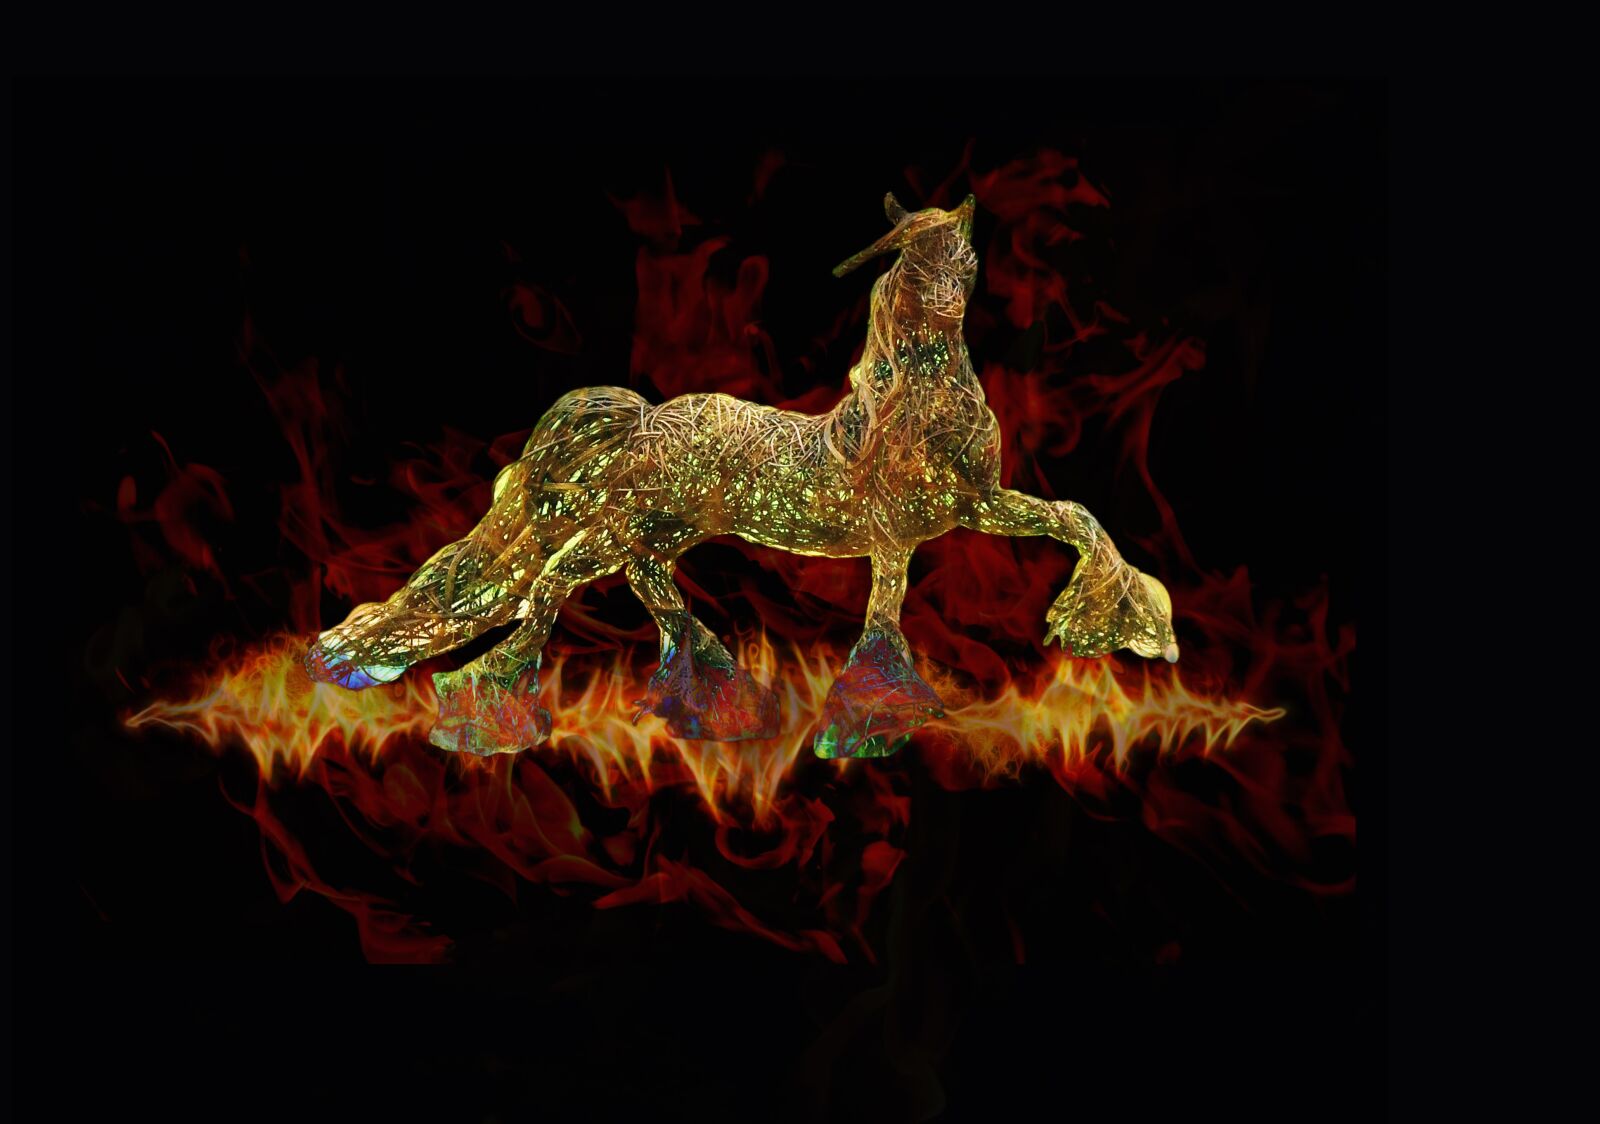 Sony Cyber-shot DSC-W320 sample photo. Horse, fire, abstract photography